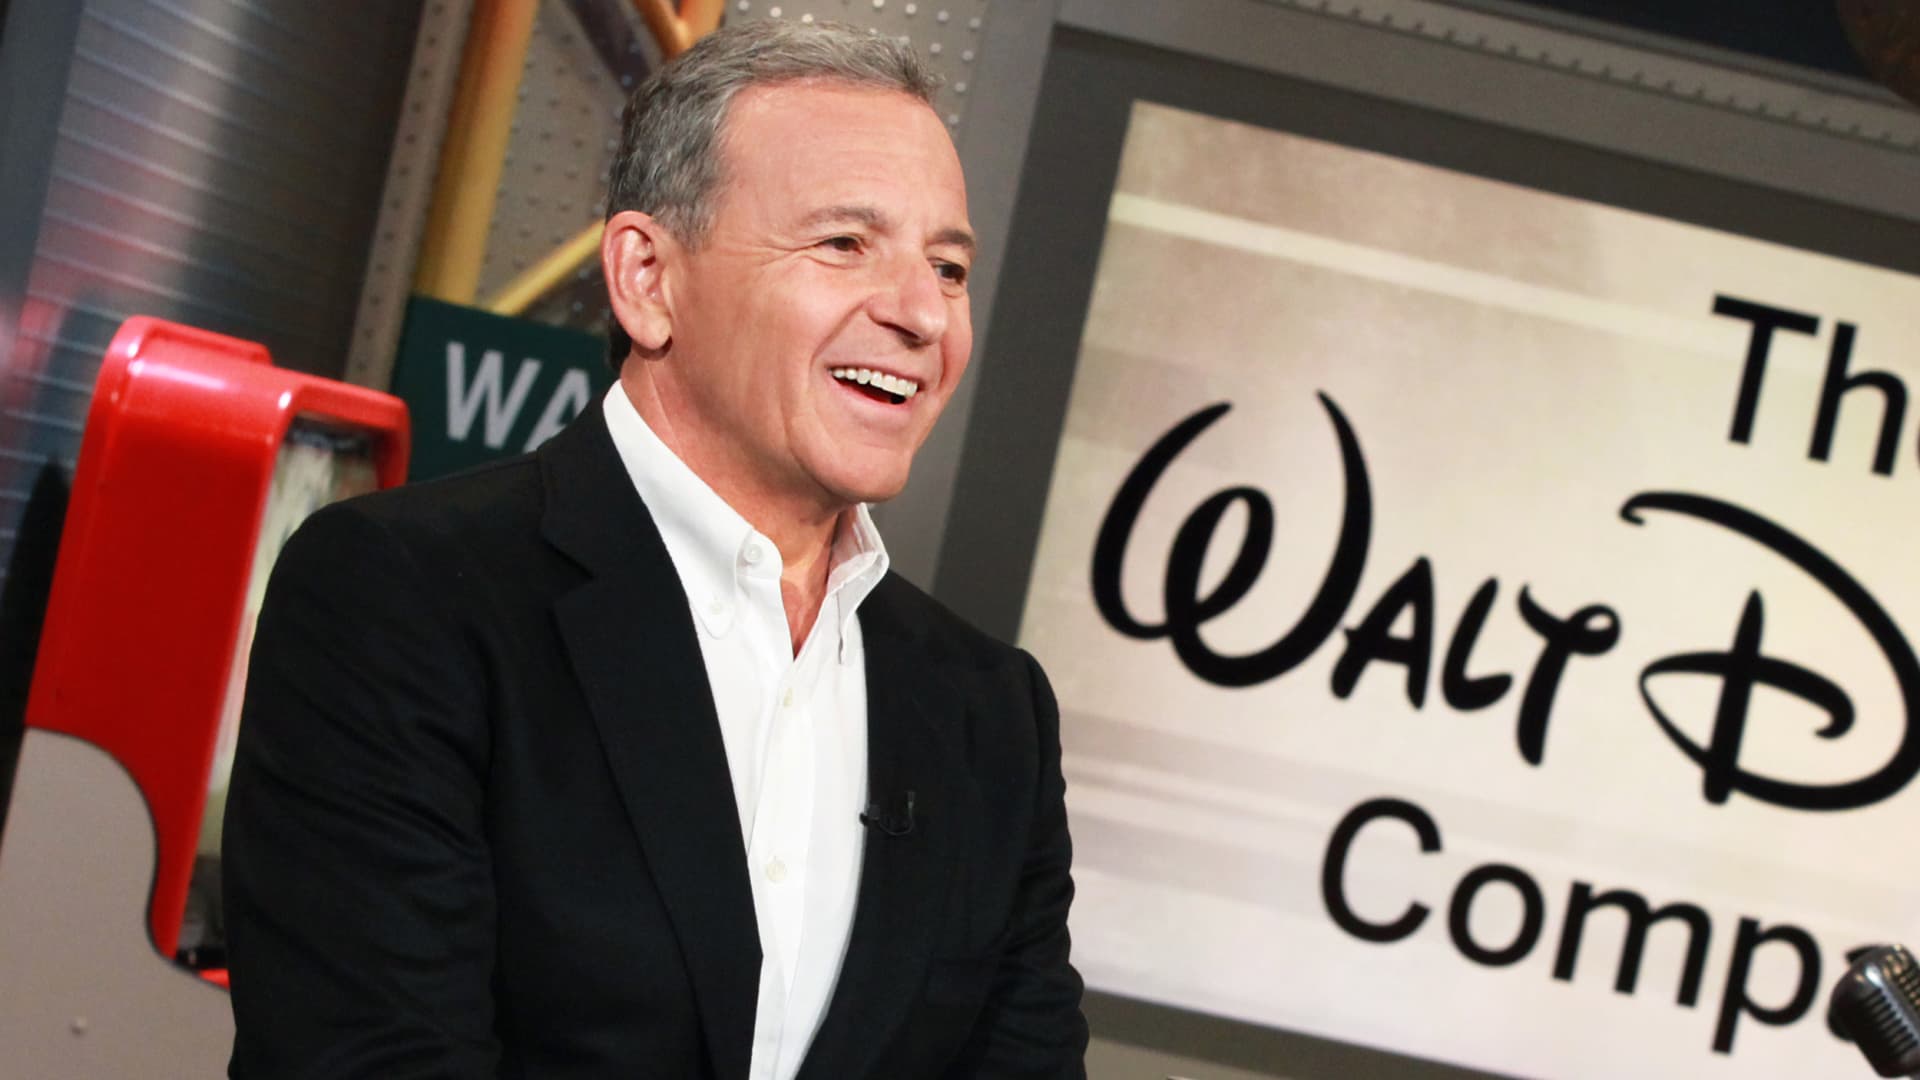 Bob Iger’s fast start back as Disney’s CEO is welcome news to shareholders like us